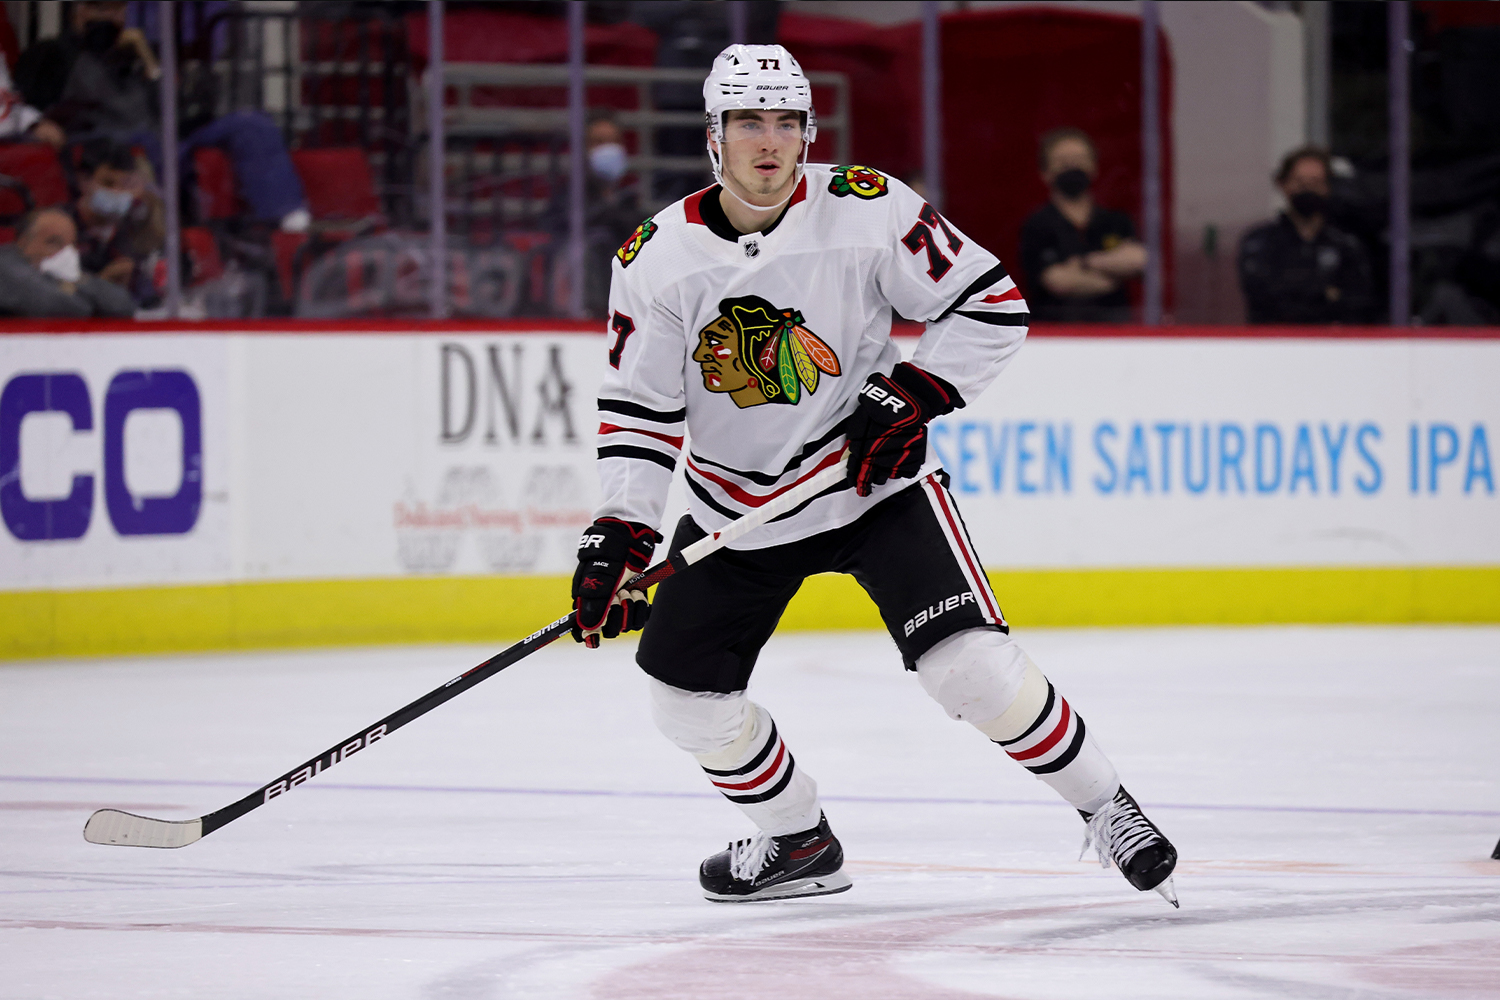 Kirby Dach #77 of the Chicago Blackhawks skates for position on the ice during an NHL game against the Carolina Hurricanes on May 3, 2021 